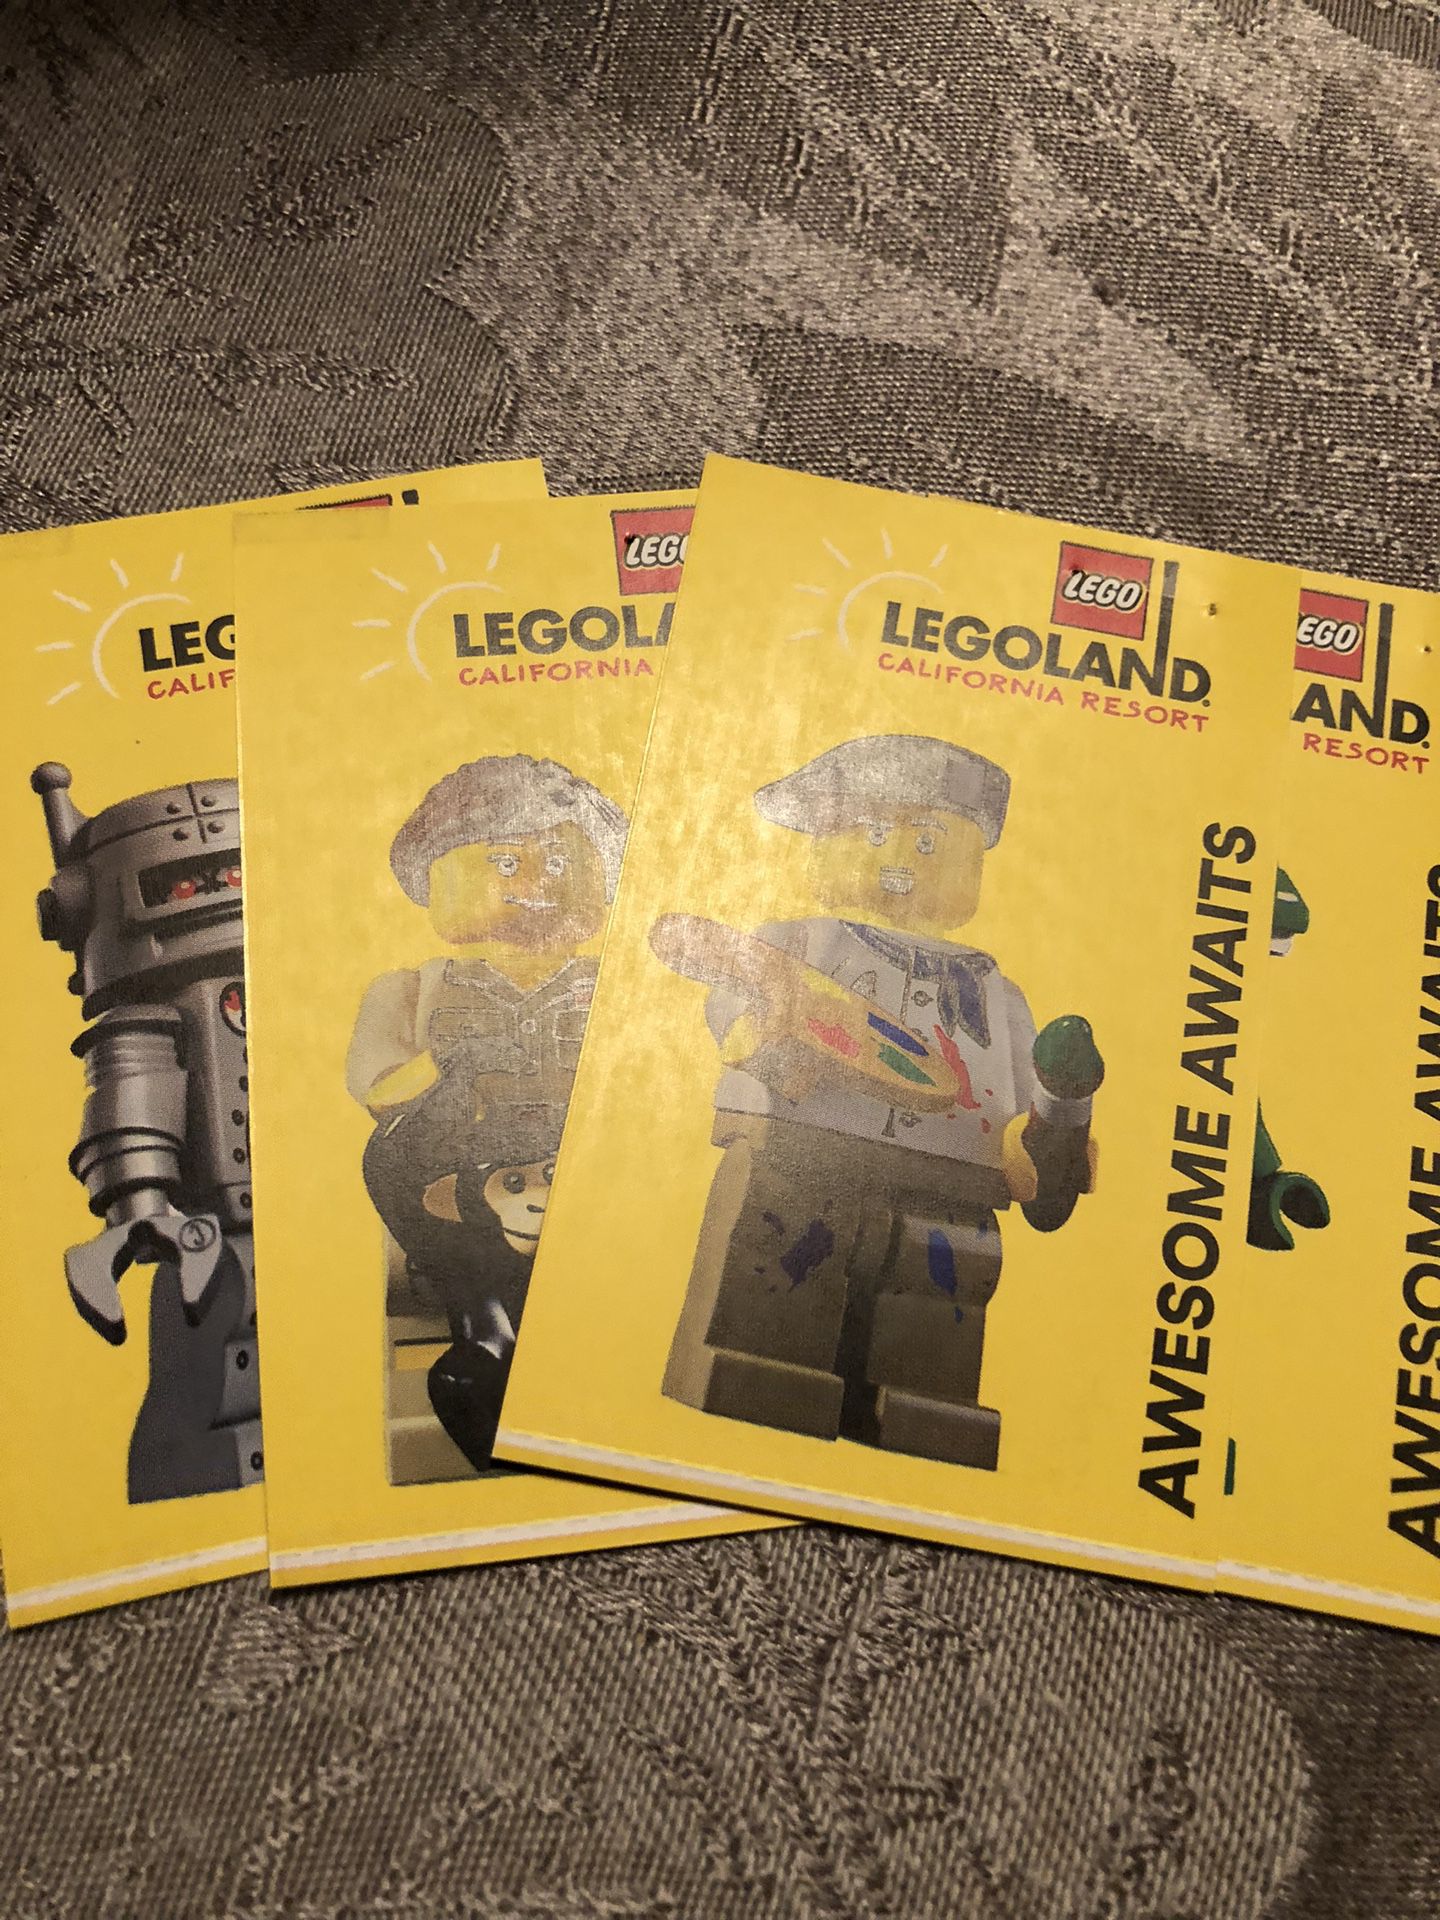 LEGO LAND 🎄(4) TICKETS 🎟️ 🎟️🎟️🎟️ $340 FOR ALL (4) MUST SELL ALL TOGETHER 